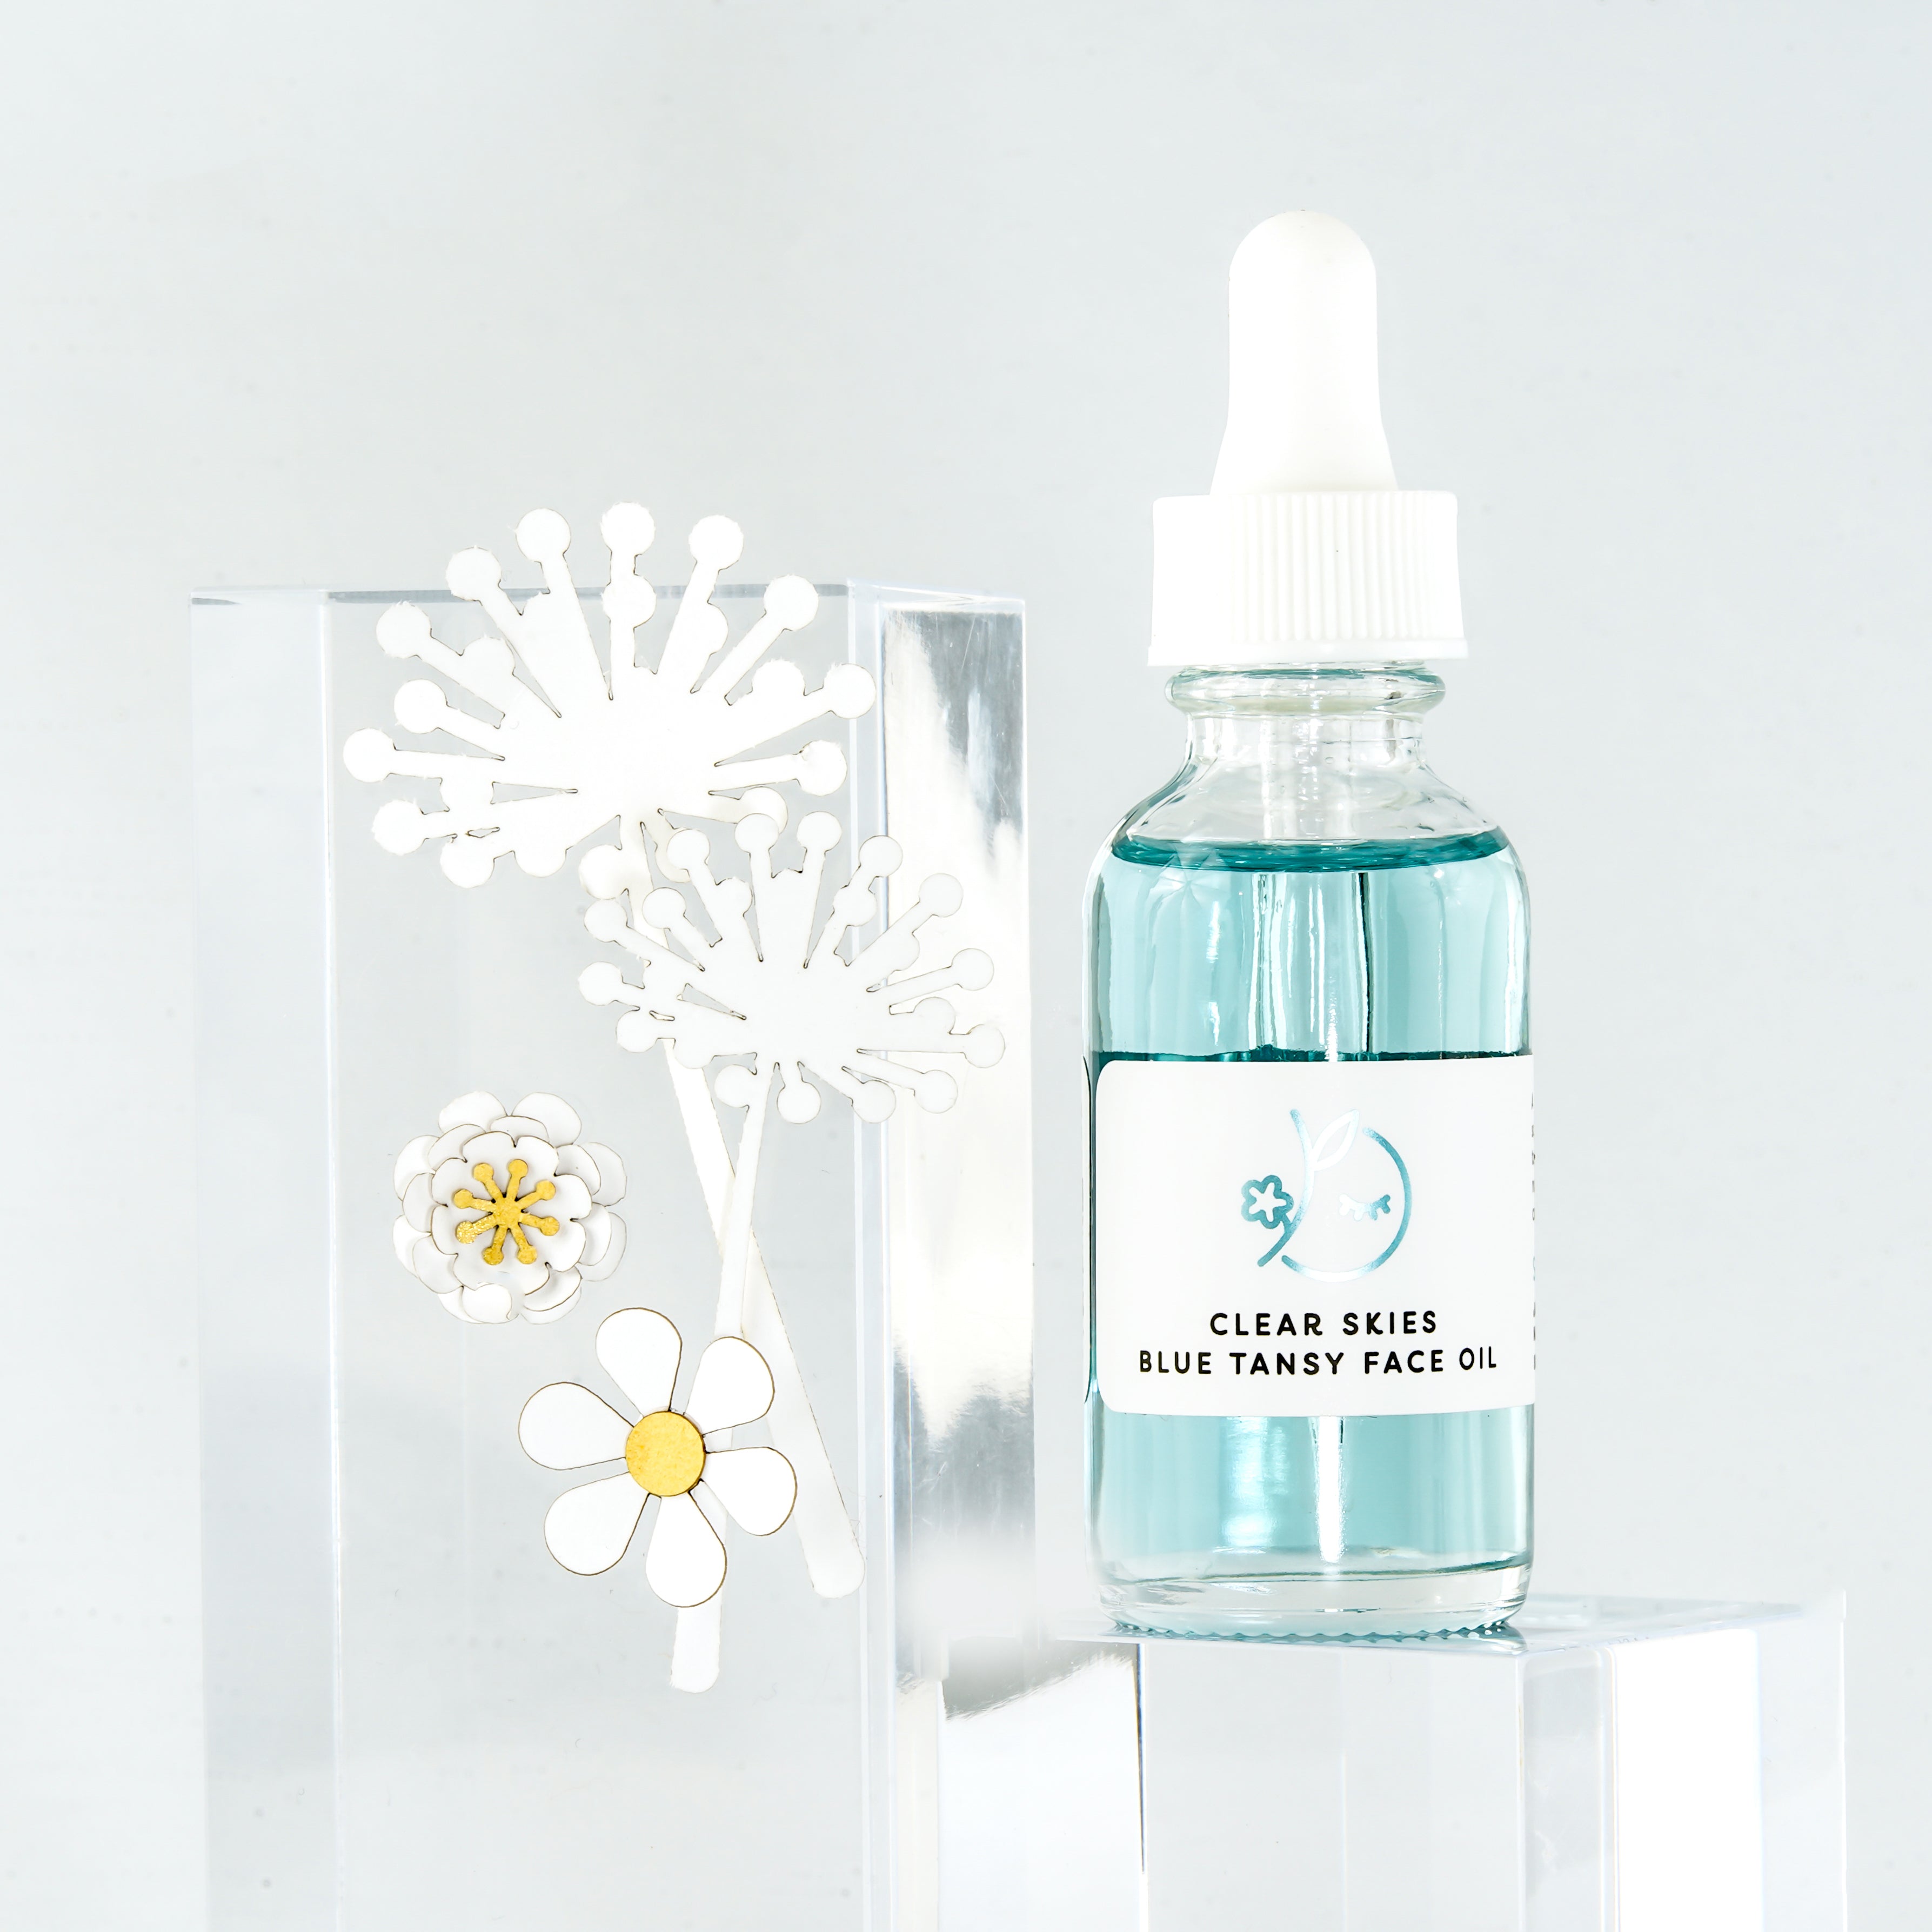 Clear Skies Blue Tansy Face Oil